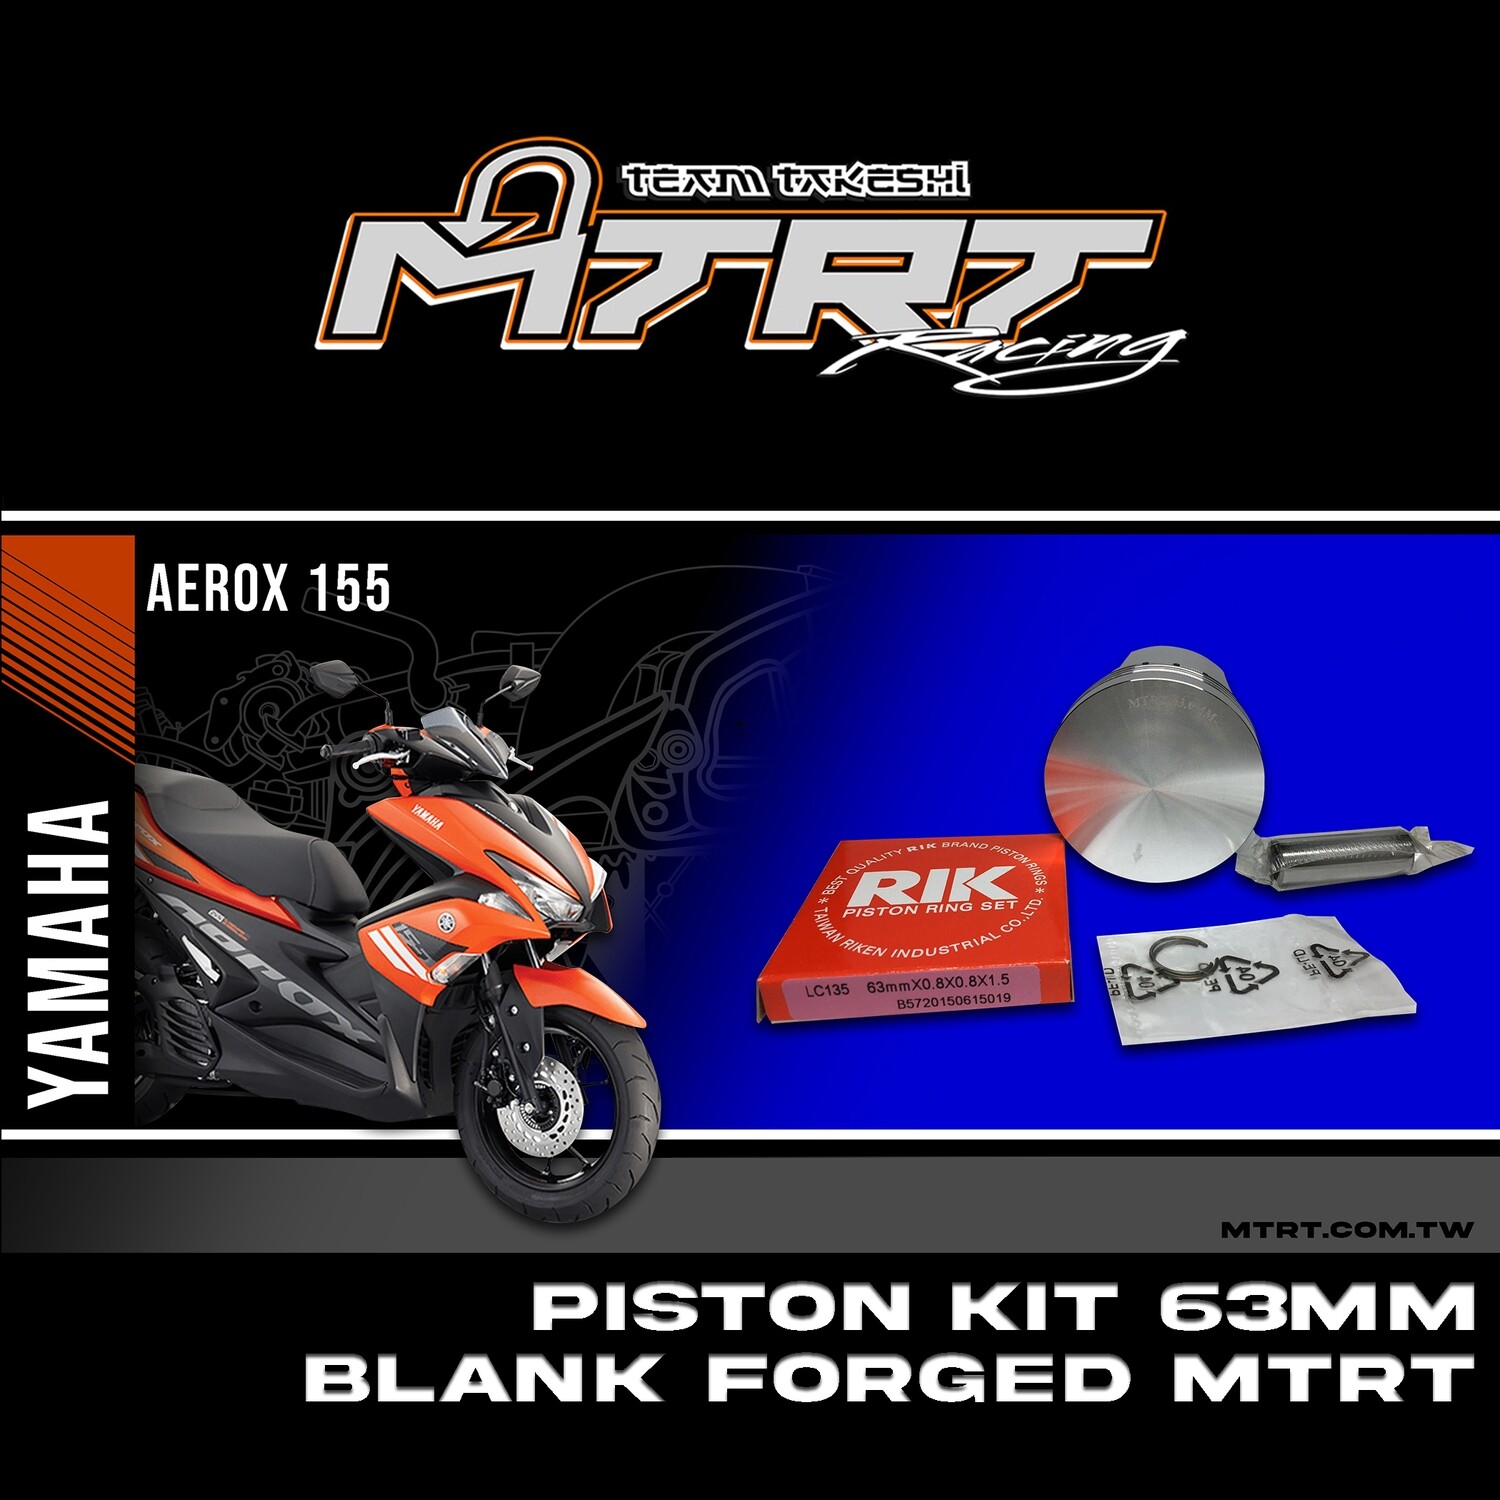 PISTON KIT 63mm Blank Forged MTRT